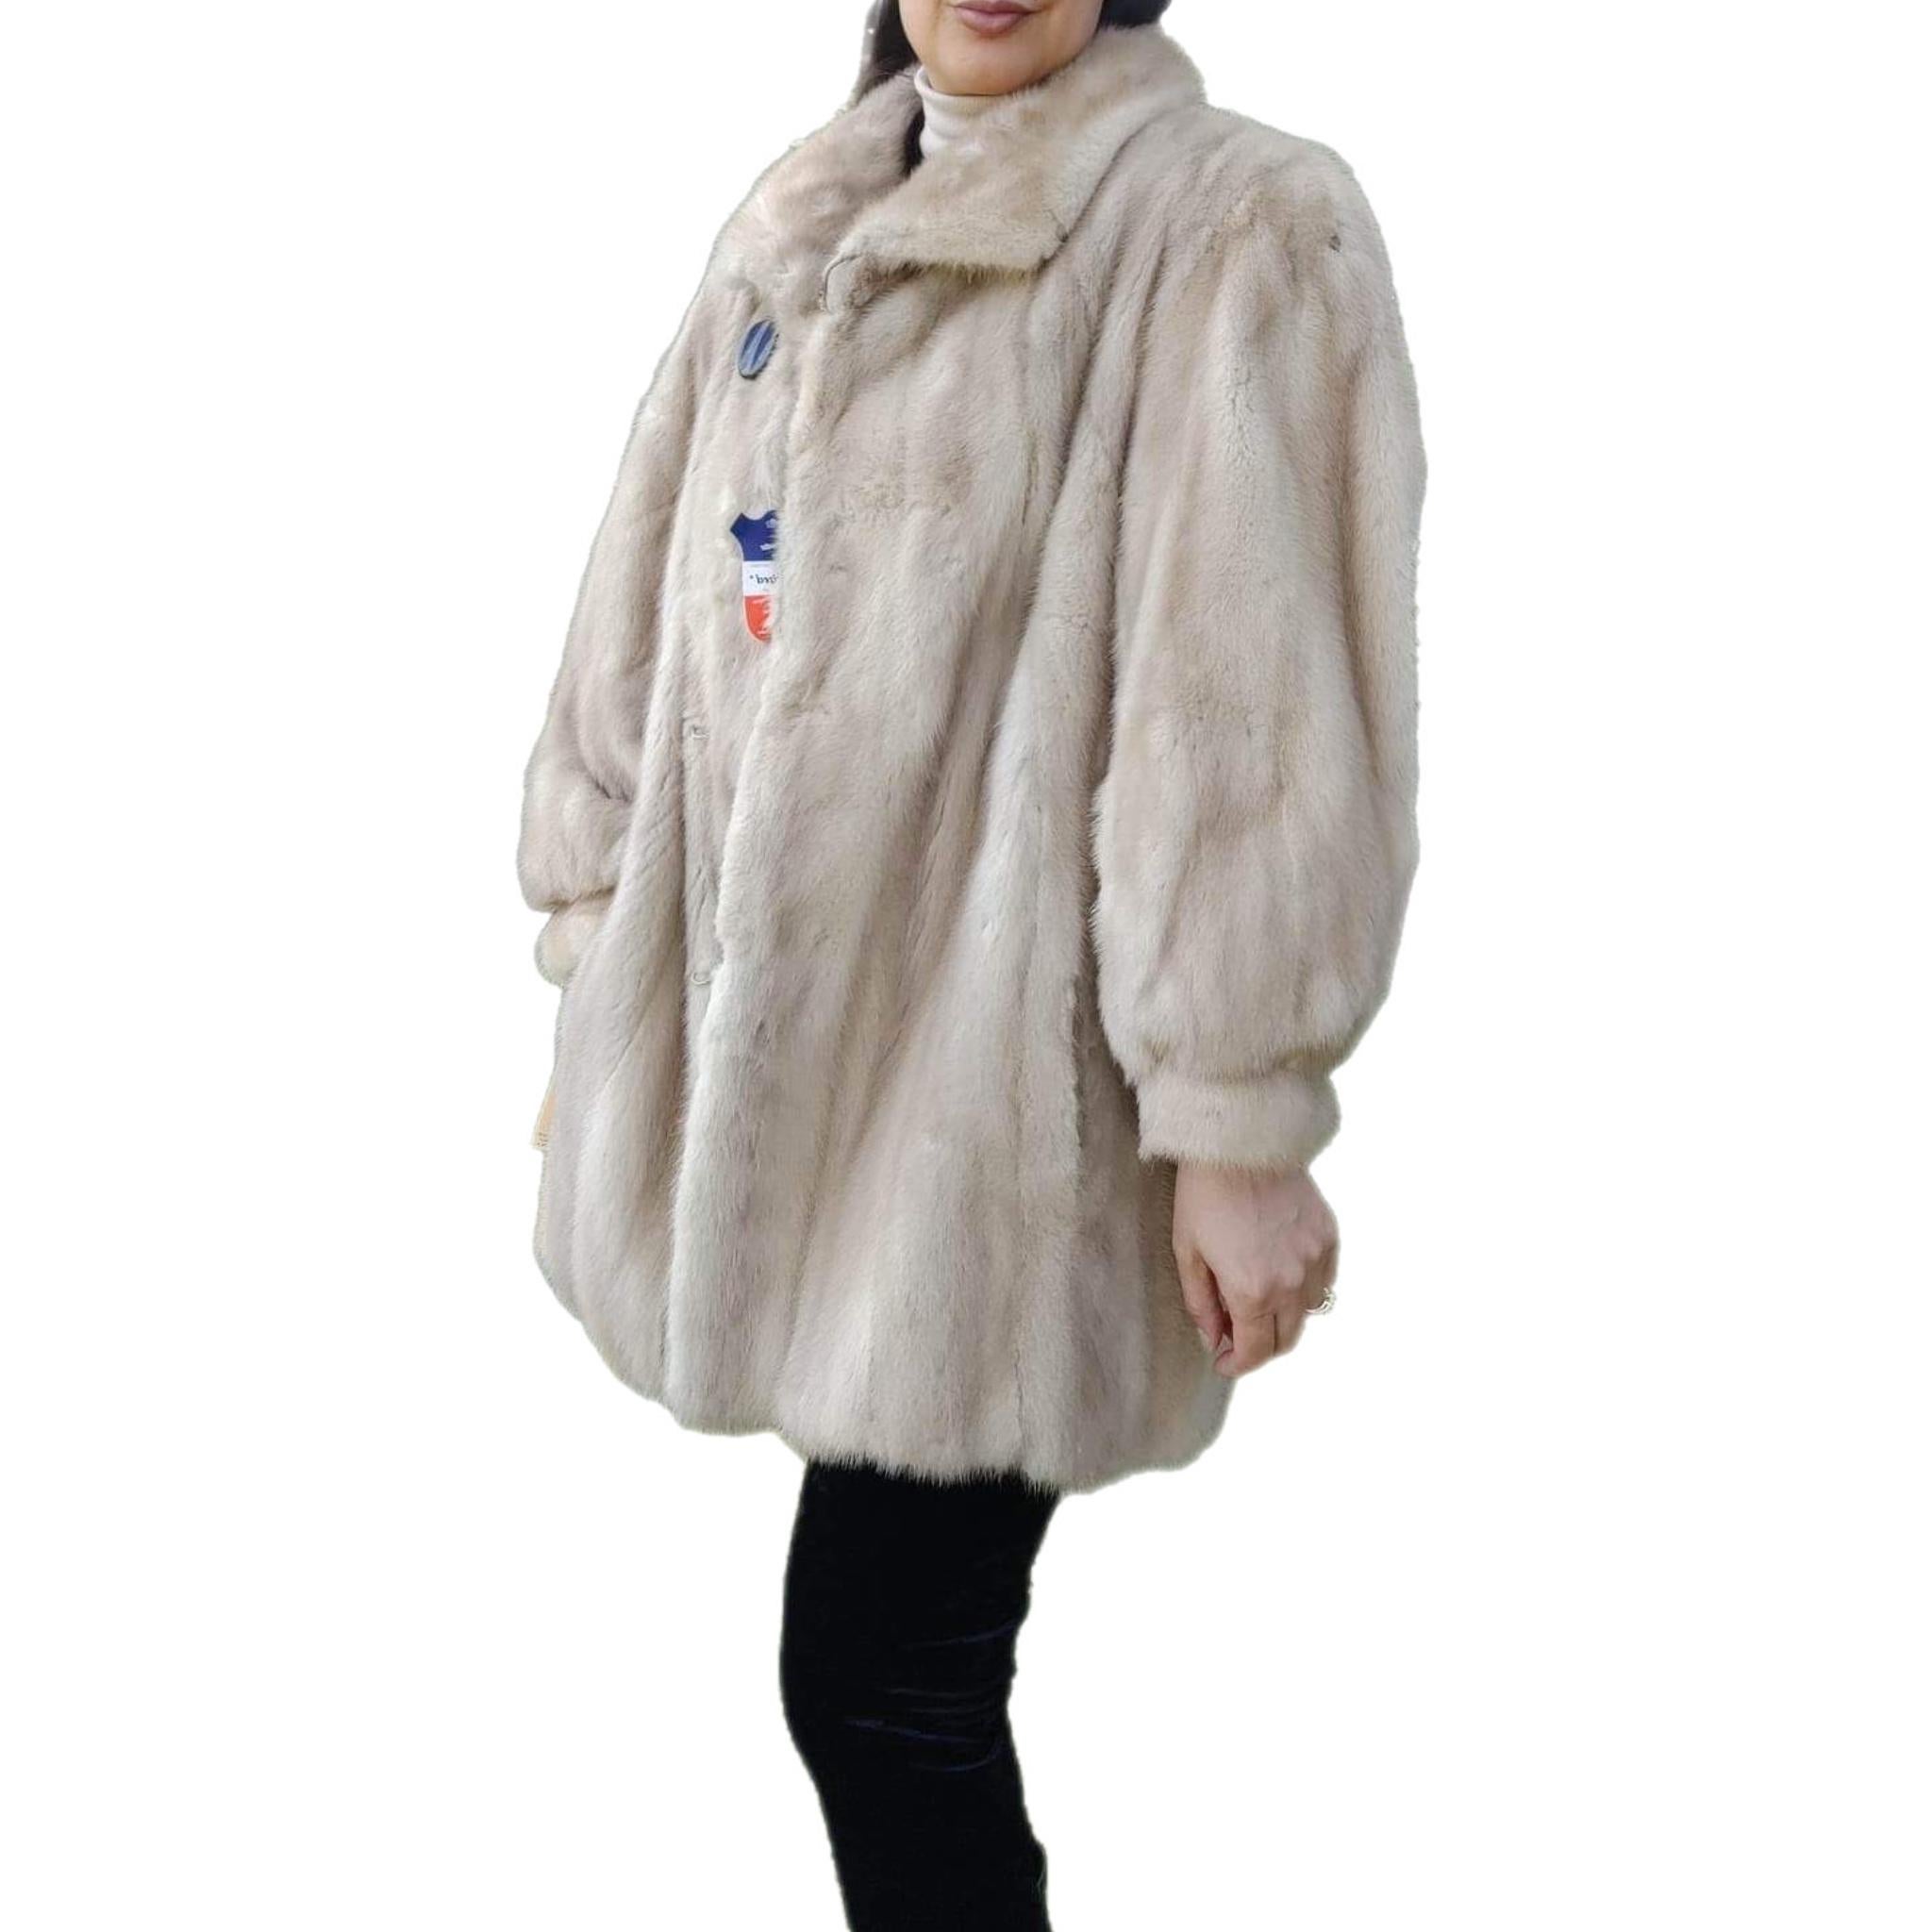 ~ Unused Blush Pastel Mink Fur Coat (Size 12 - l) 

When it comes to fur, Canada Majestic is the ultimate reference in quality and style. This stunning blush coat is a classic with the stroller design and short collar stitching workmanship. It has a